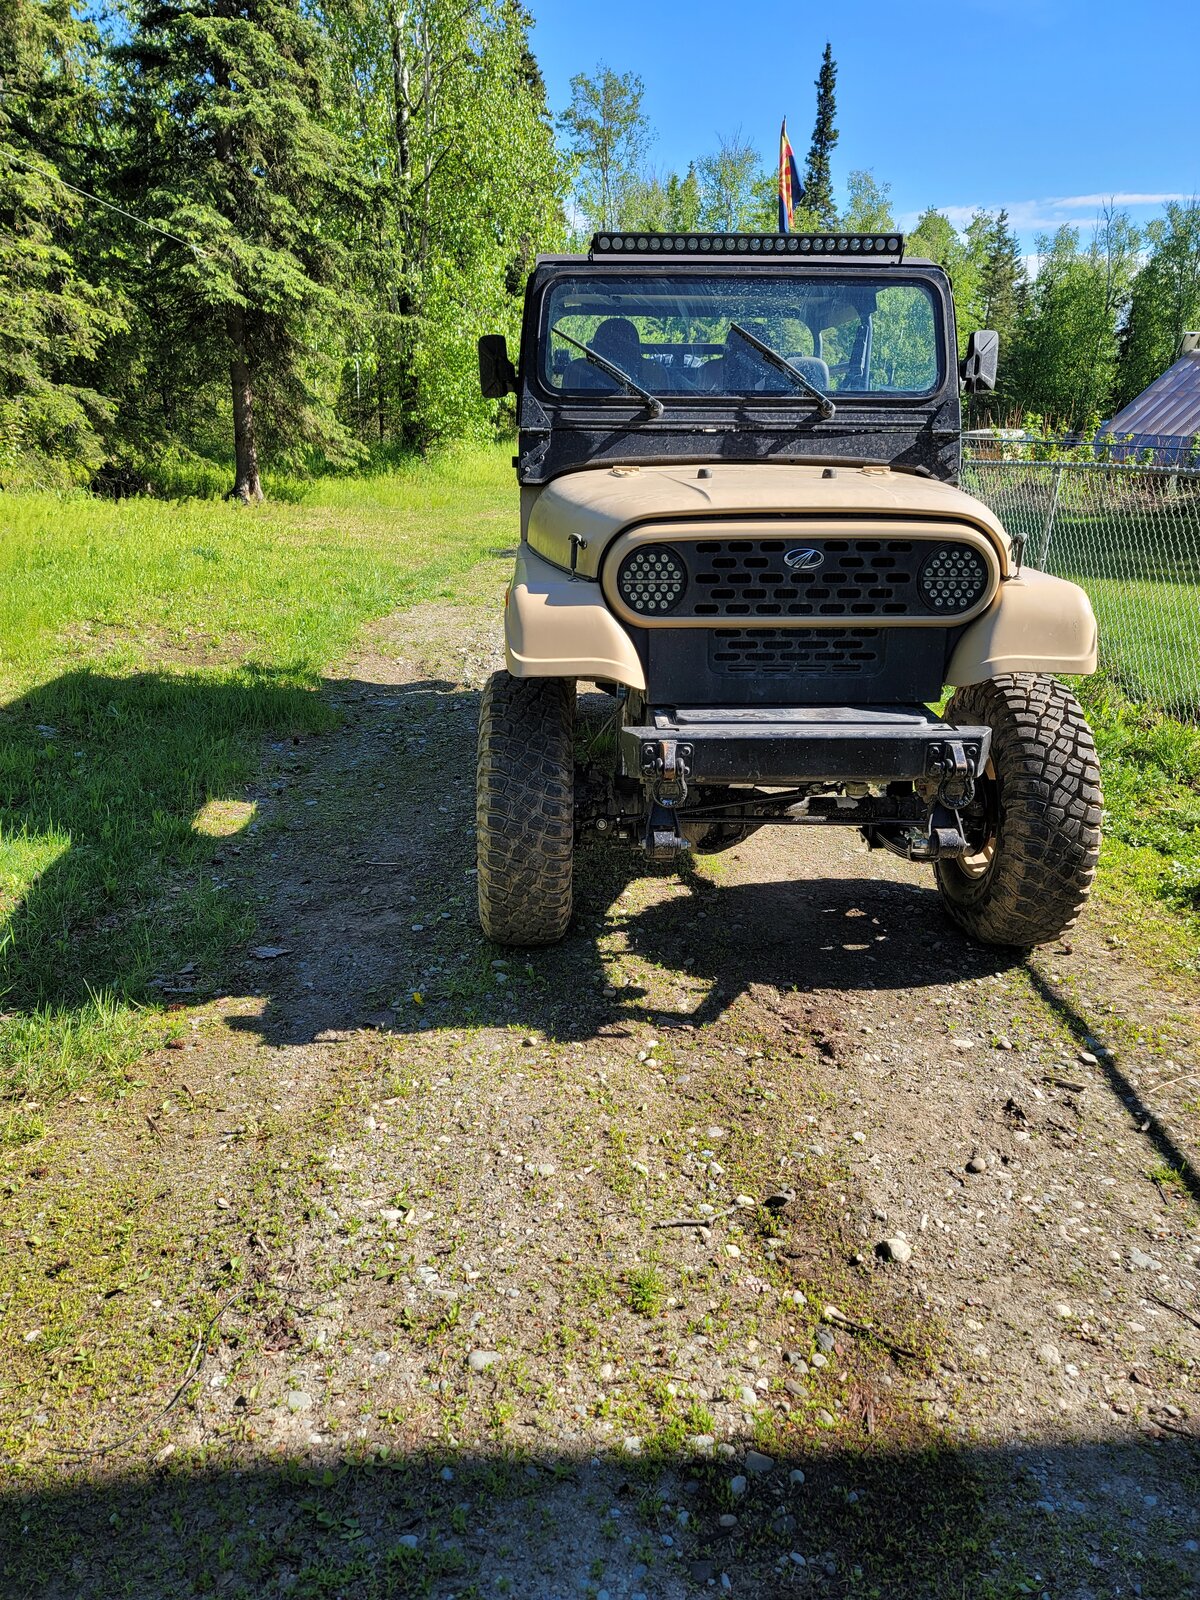 Climax Offroad Long Travel Suspension Kits | Page 5 | Team ROXOR Forum